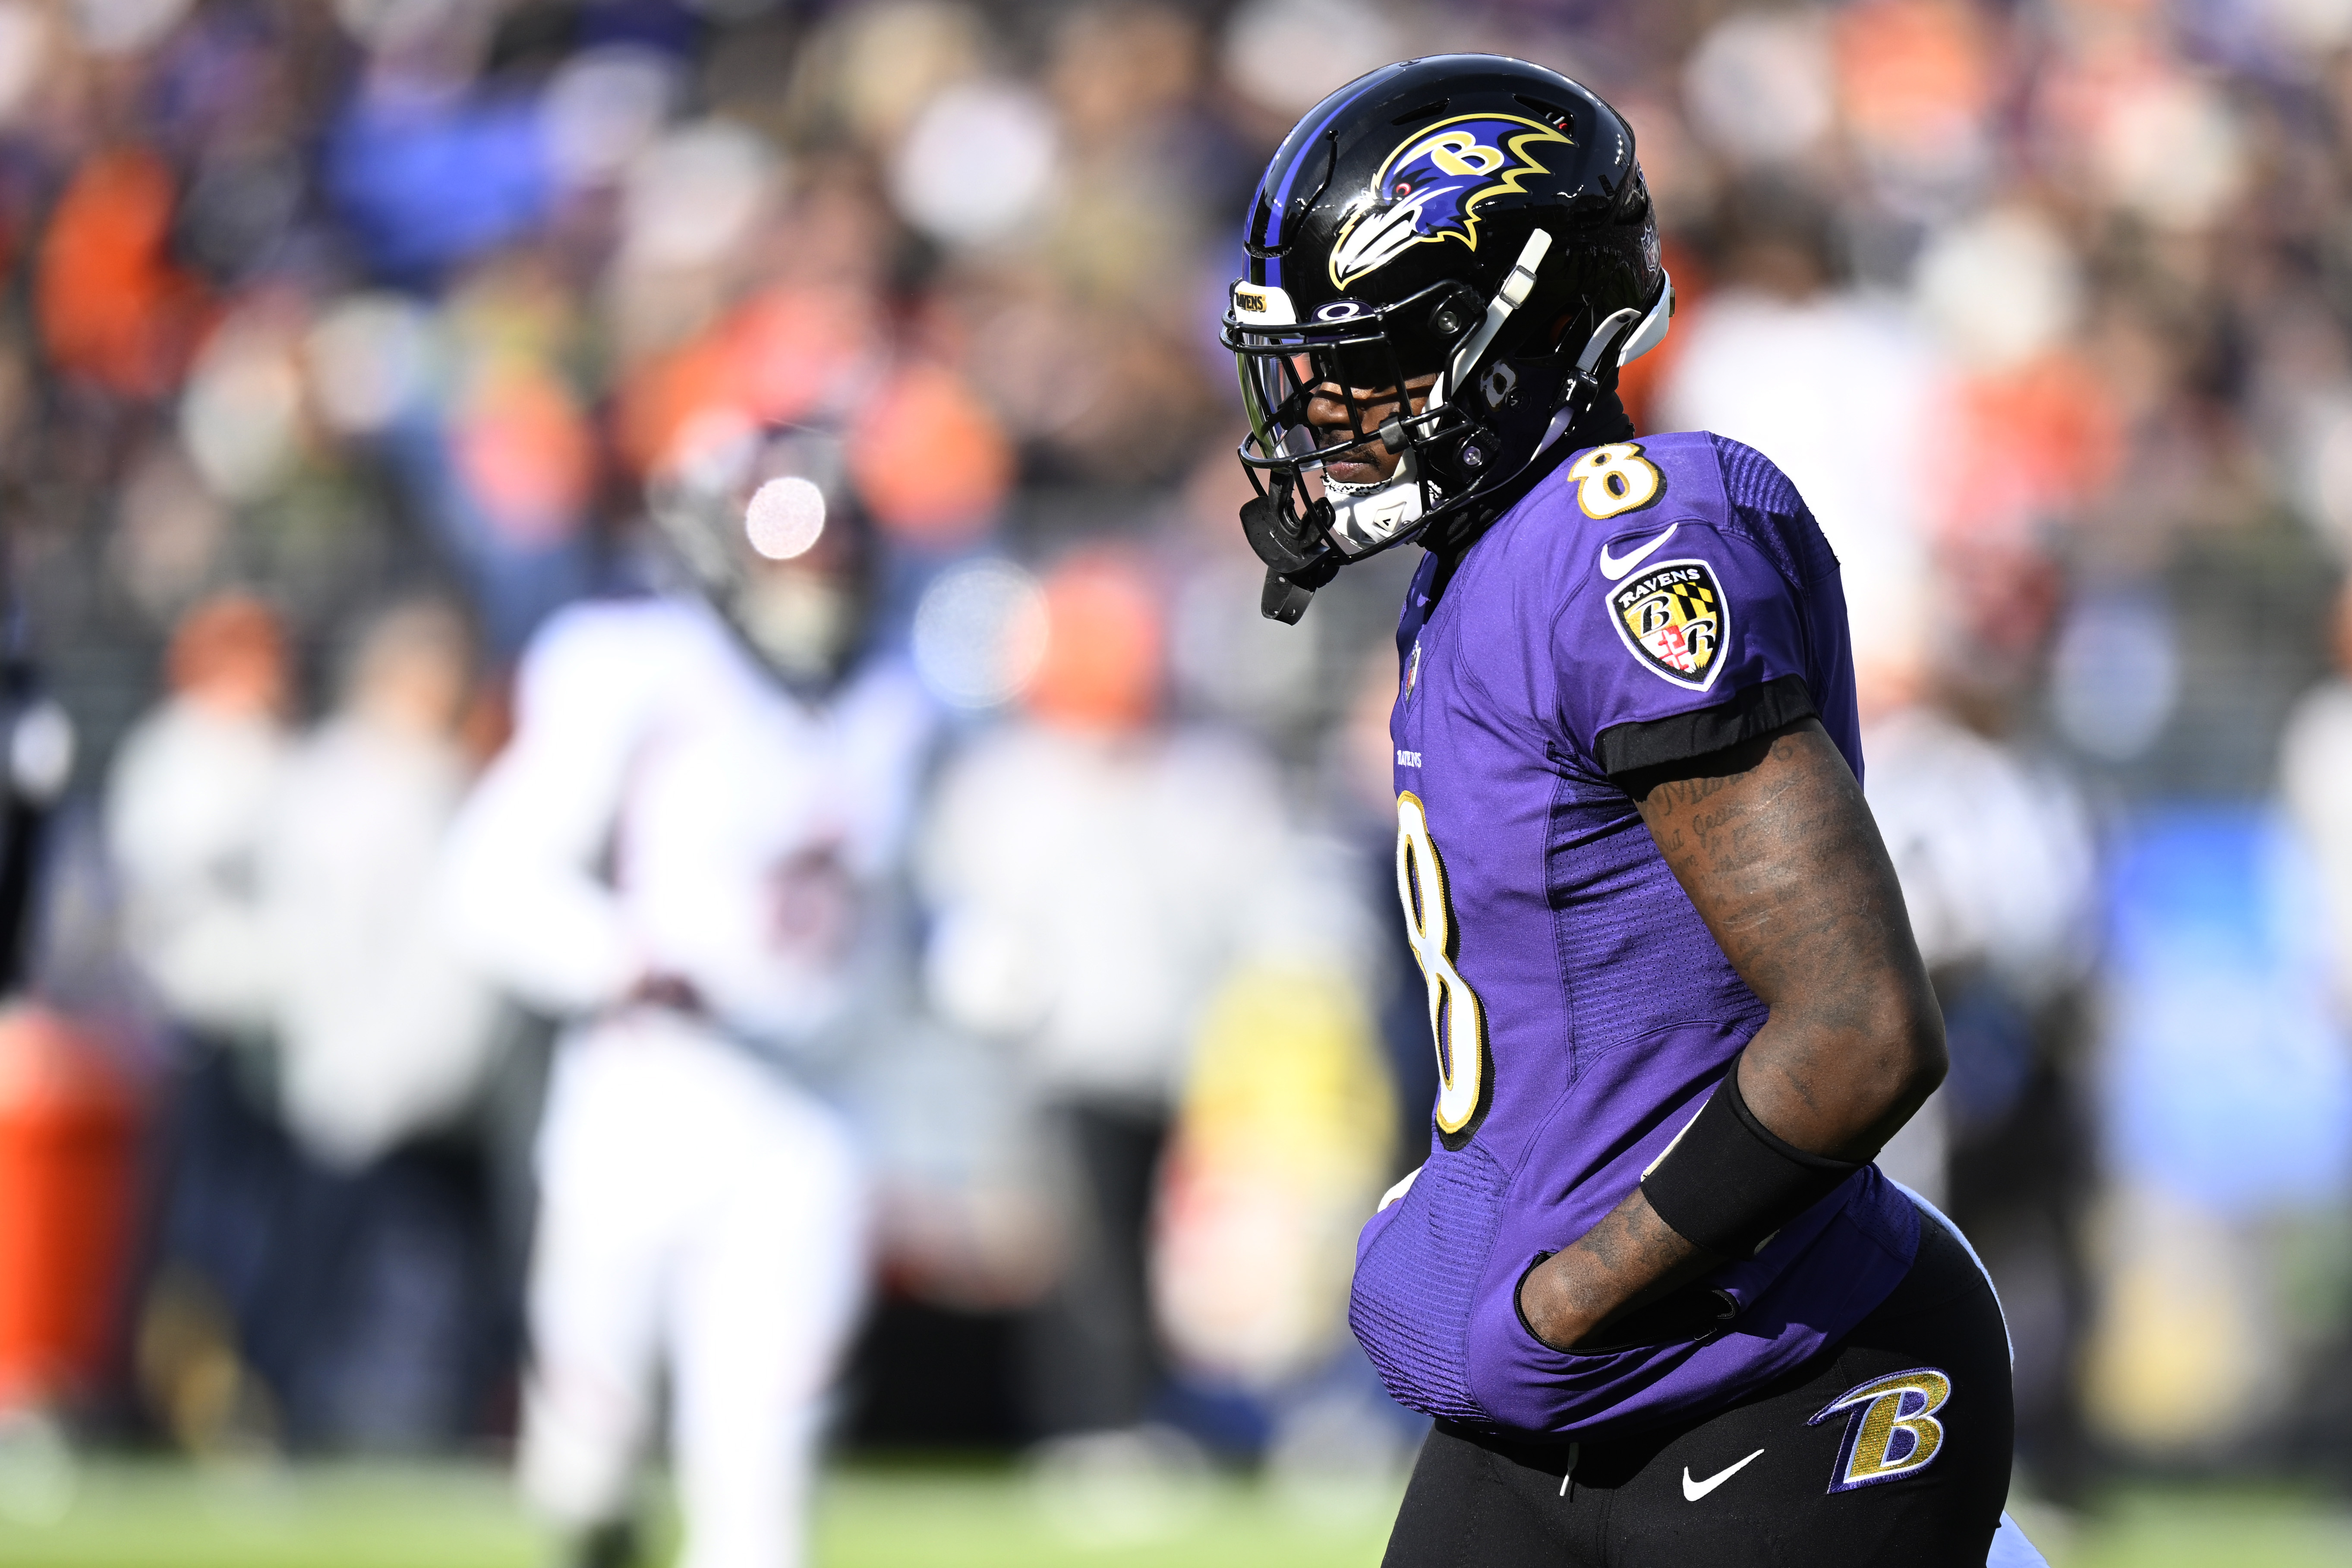 Lamar Jackson #8 of the Baltimore Ravens looks on in the first quarter of a game against the Denver Broncos at M&amp;T Bank Stadium on December 04, 2022 in Baltimore, Maryland.